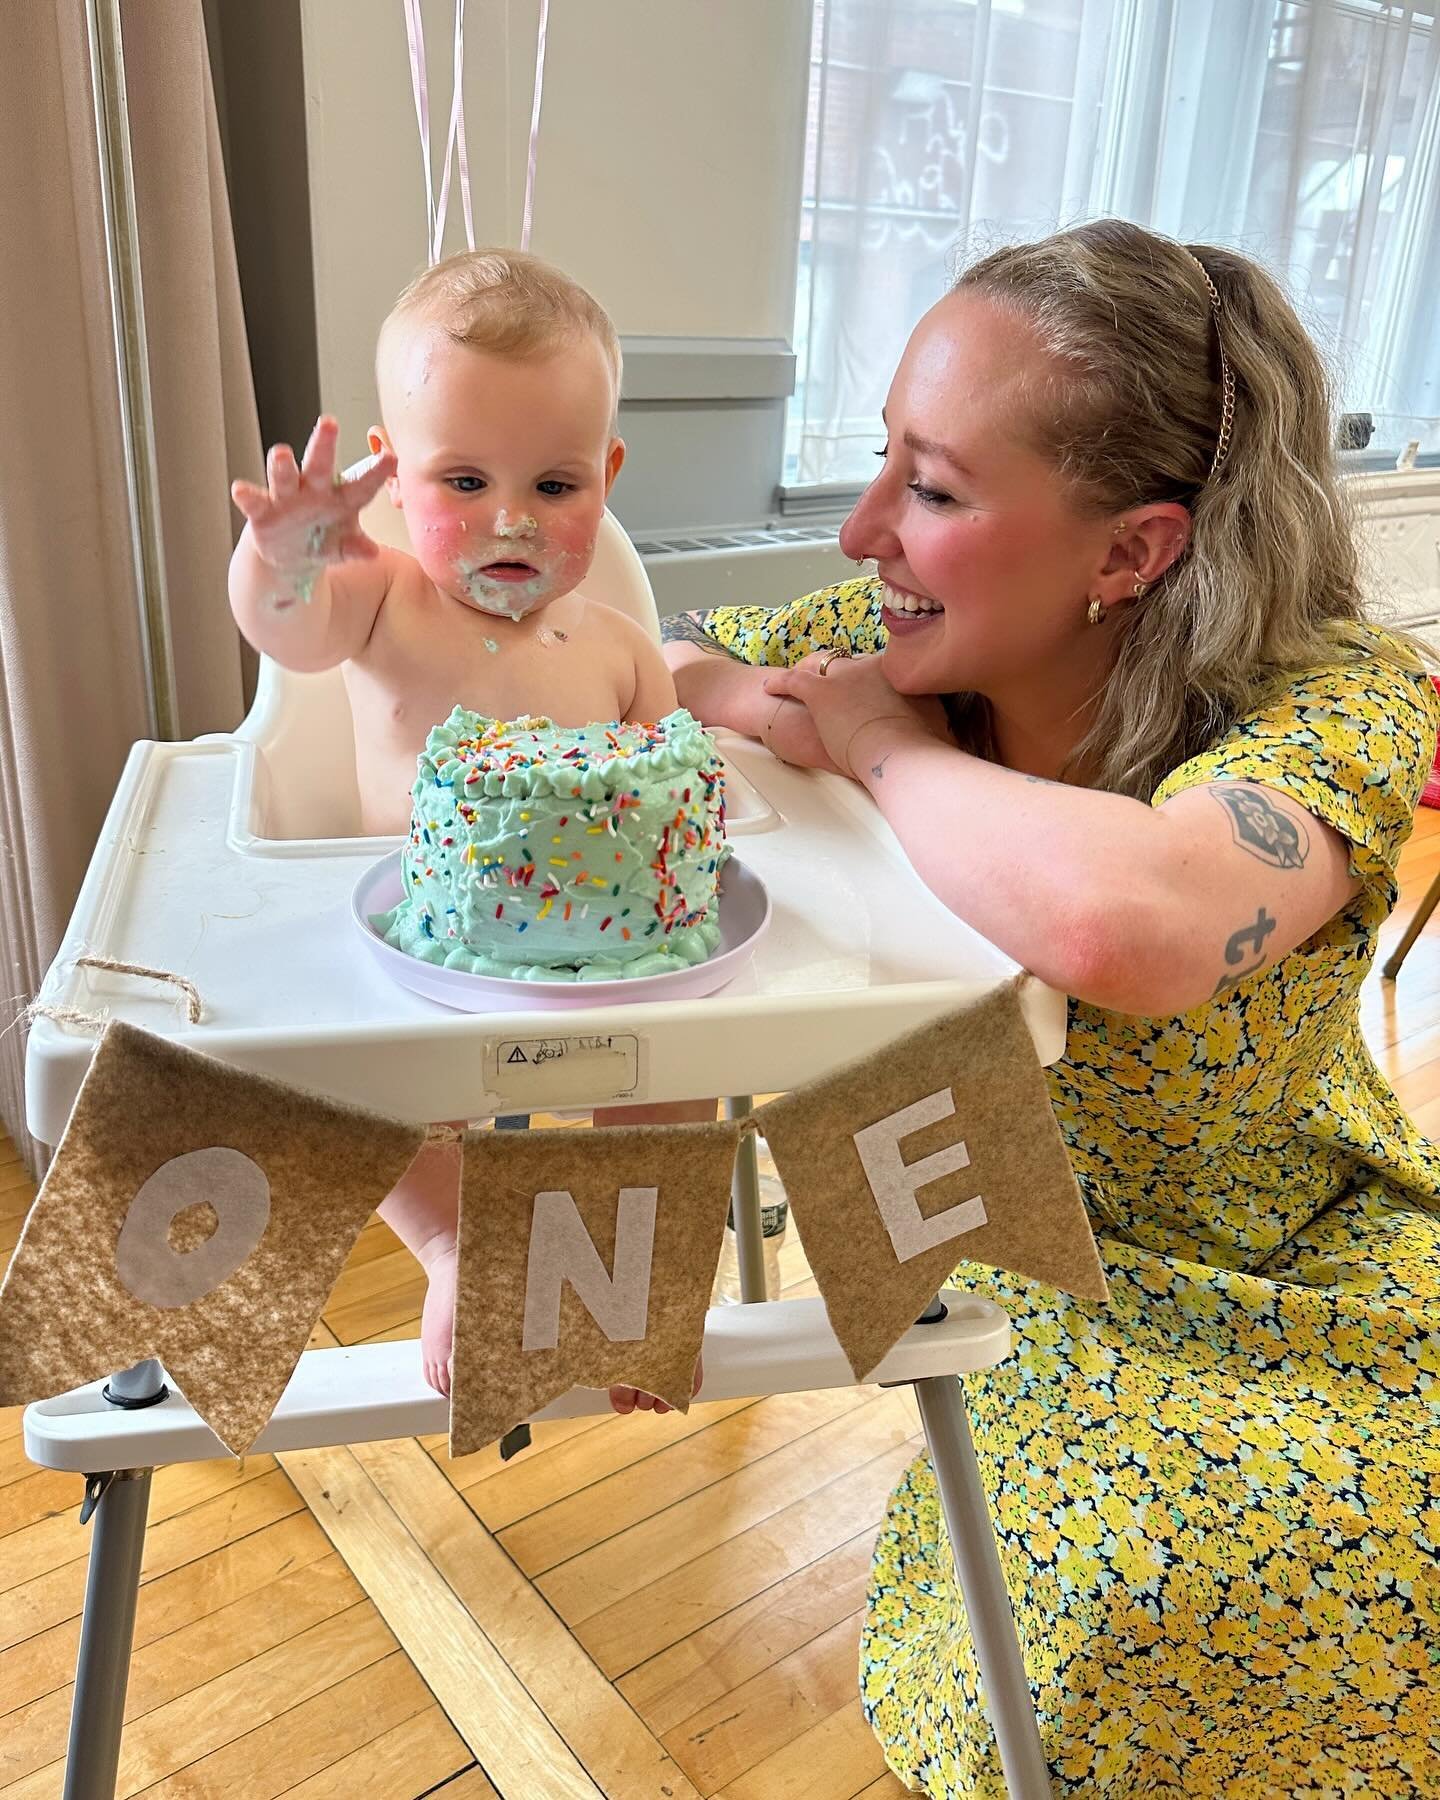 guys&hellip;&hellip; my niece is one today?!?! unclear how this happened!!! happy bday to my animal-loving partner in crime 🎂 turns out being an aunt is even better than everyone said! cheers (her favorite dinner table game &mdash; see last vid for 